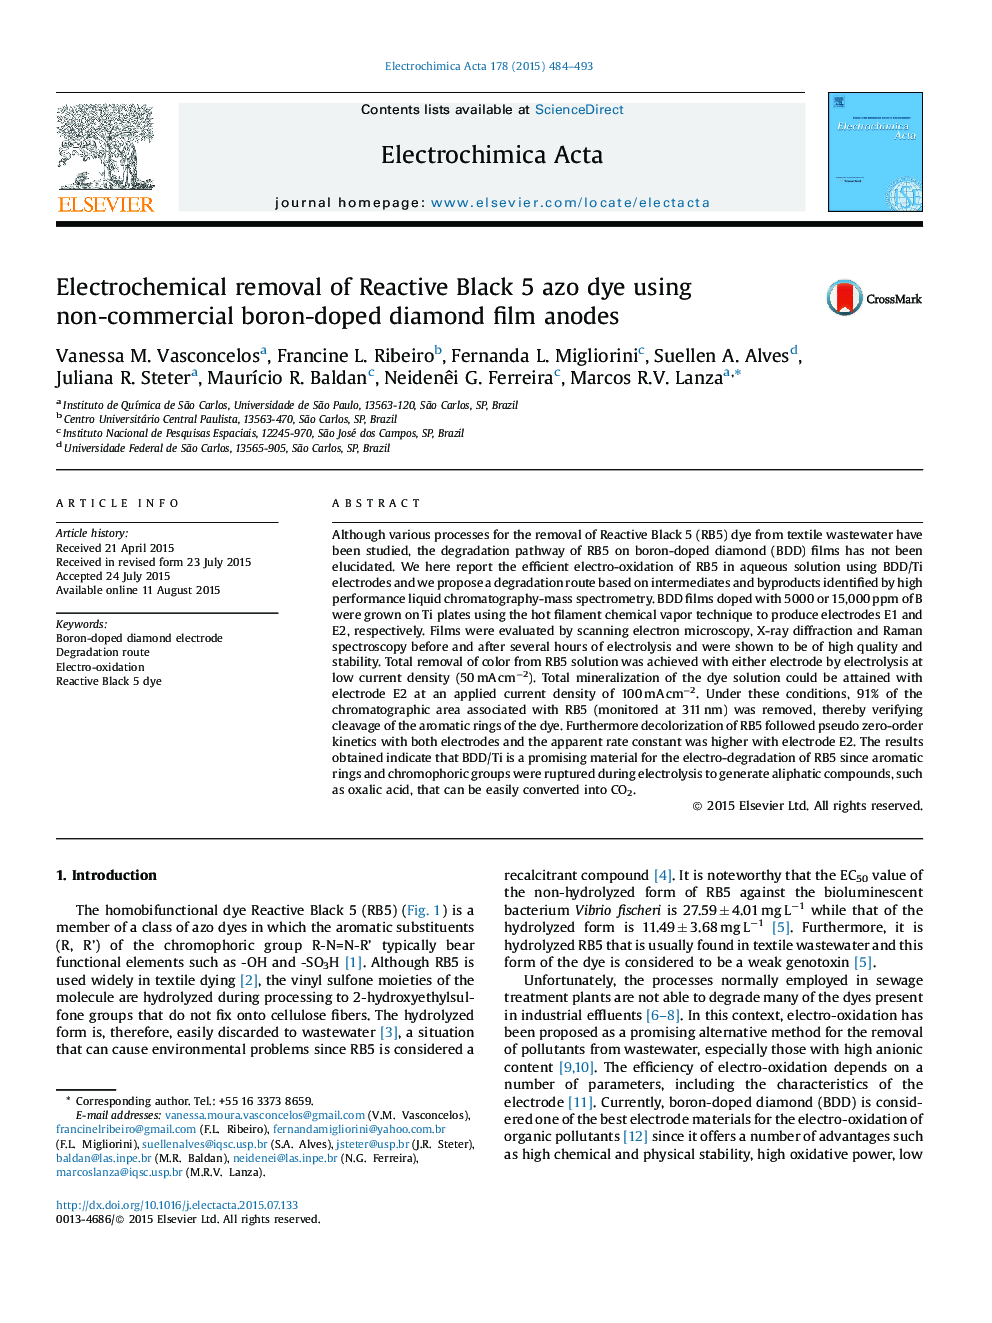 Electrochemical removal of Reactive Black 5 azo dye using non-commercial boron-doped diamond film anodes